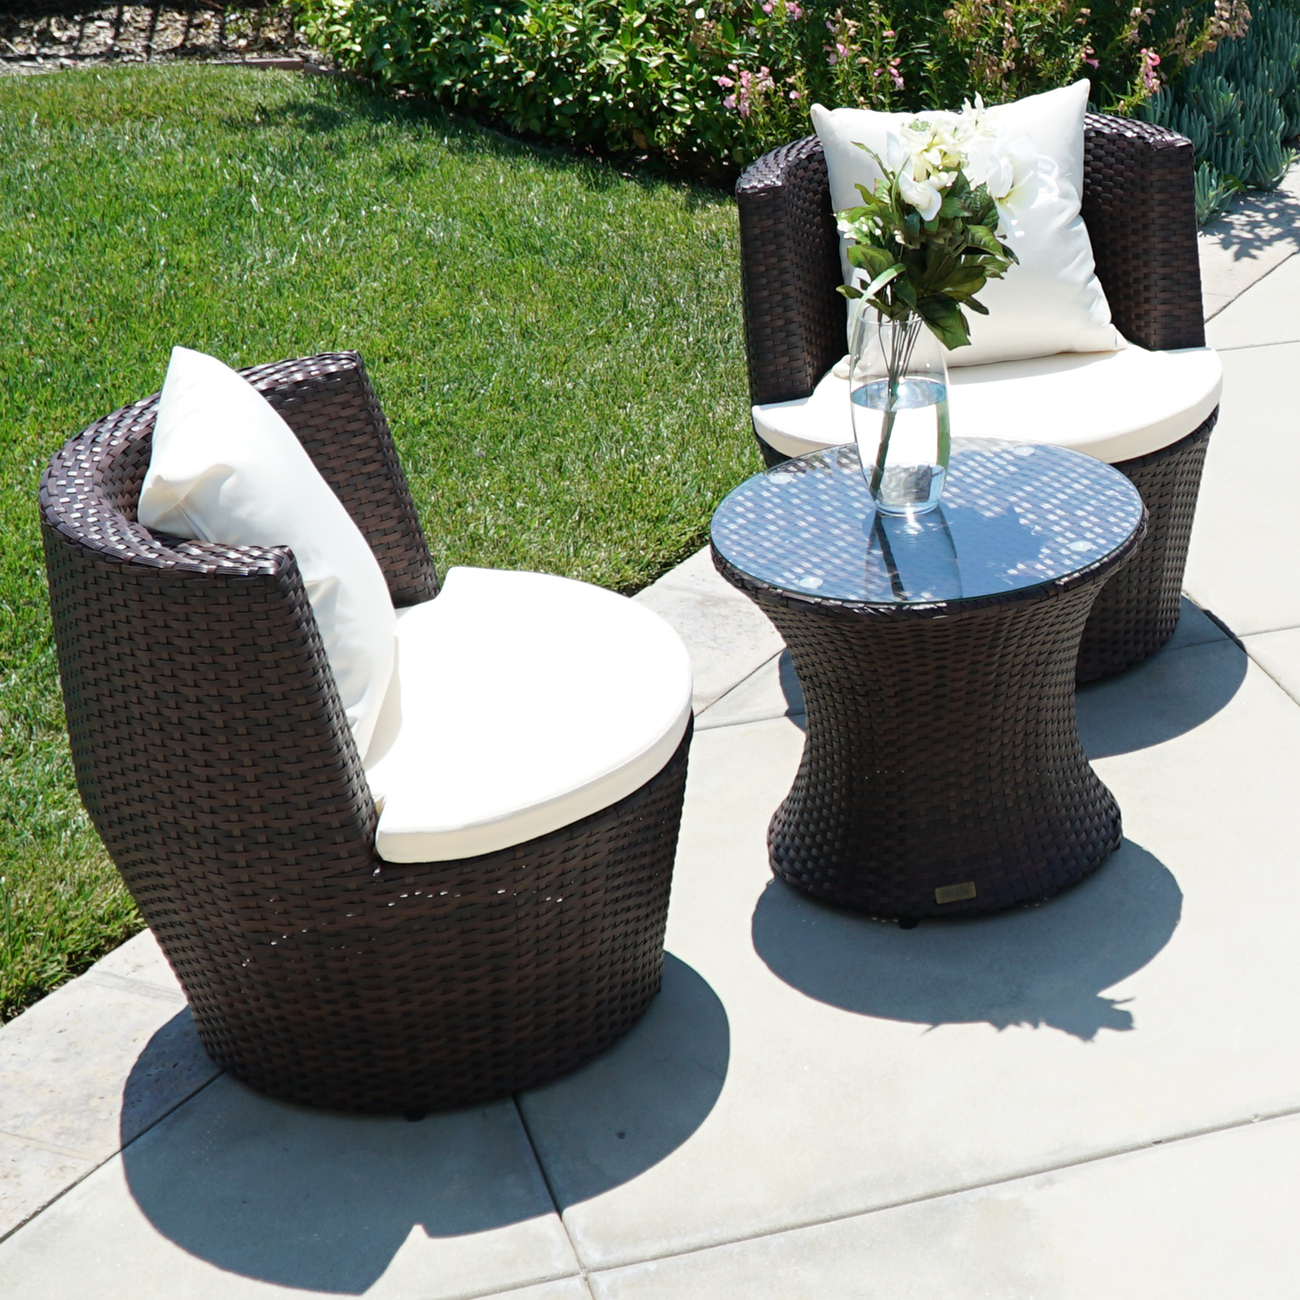 Details About 3 Pc Patio Outdoor Rattan Set Wicker Furniture Glass Table Brown Round Chairs for size 1300 X 1300